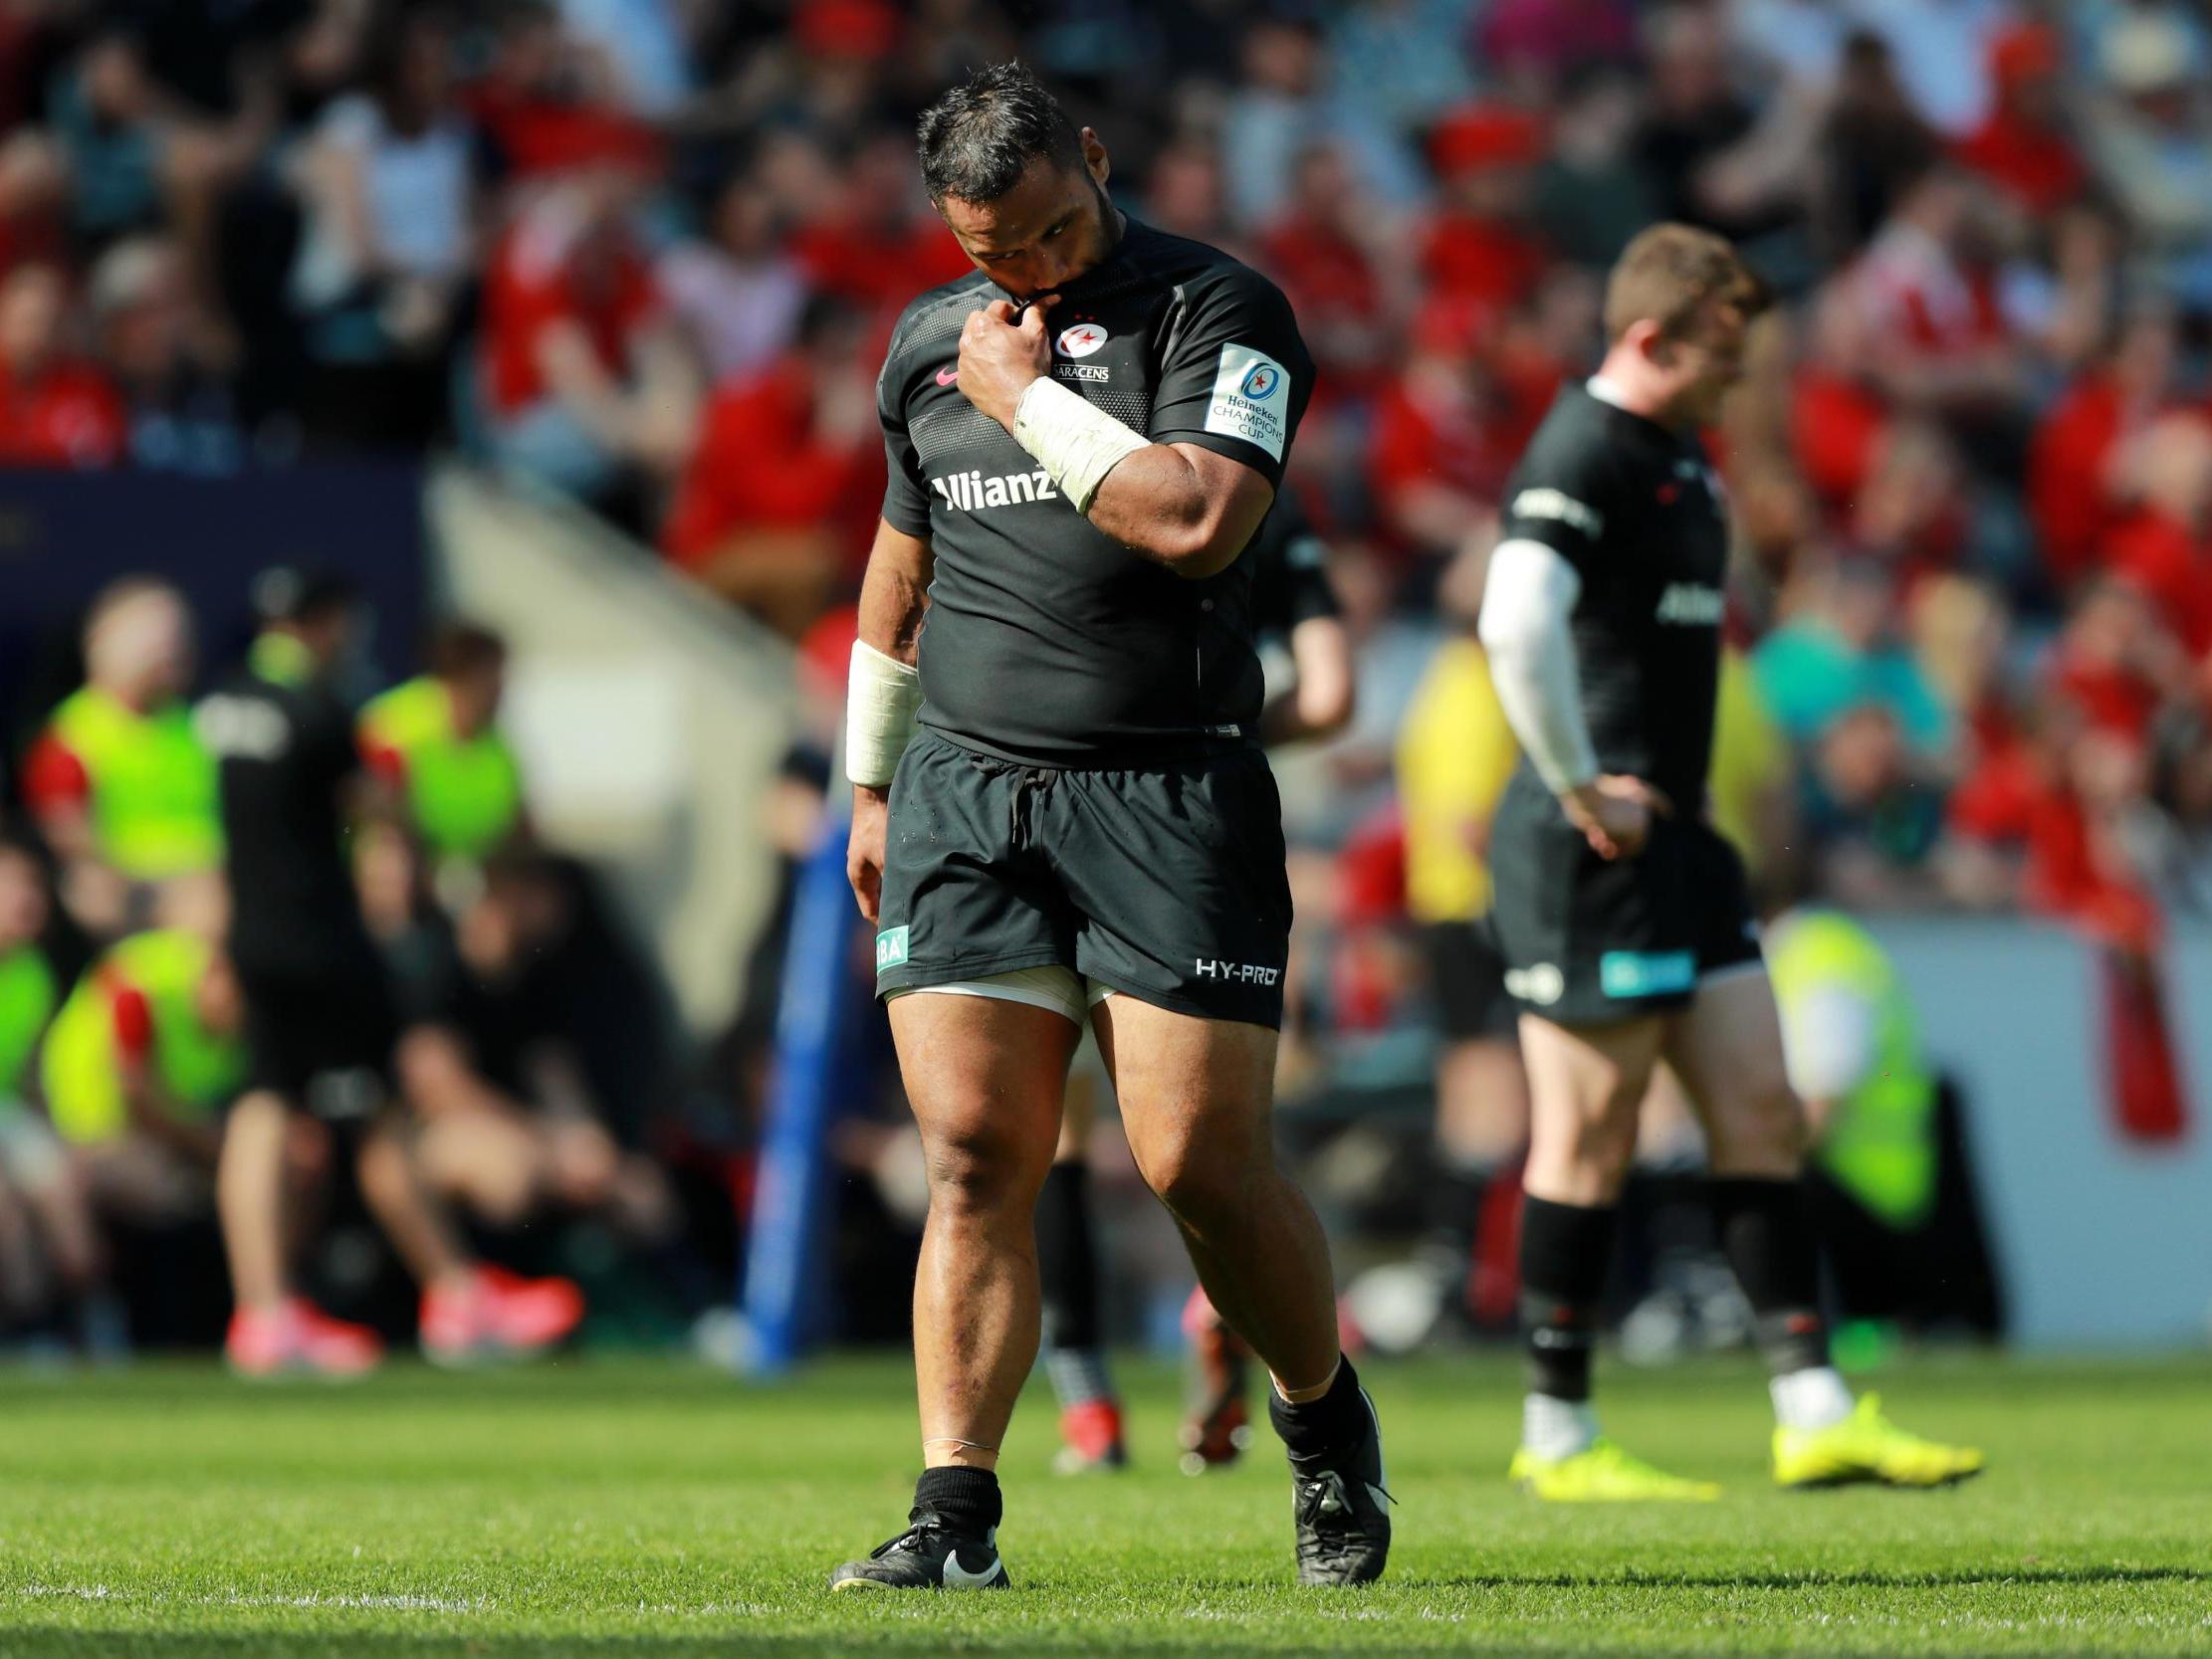 We can’t pretend Billy Vunipola is the victim in all this